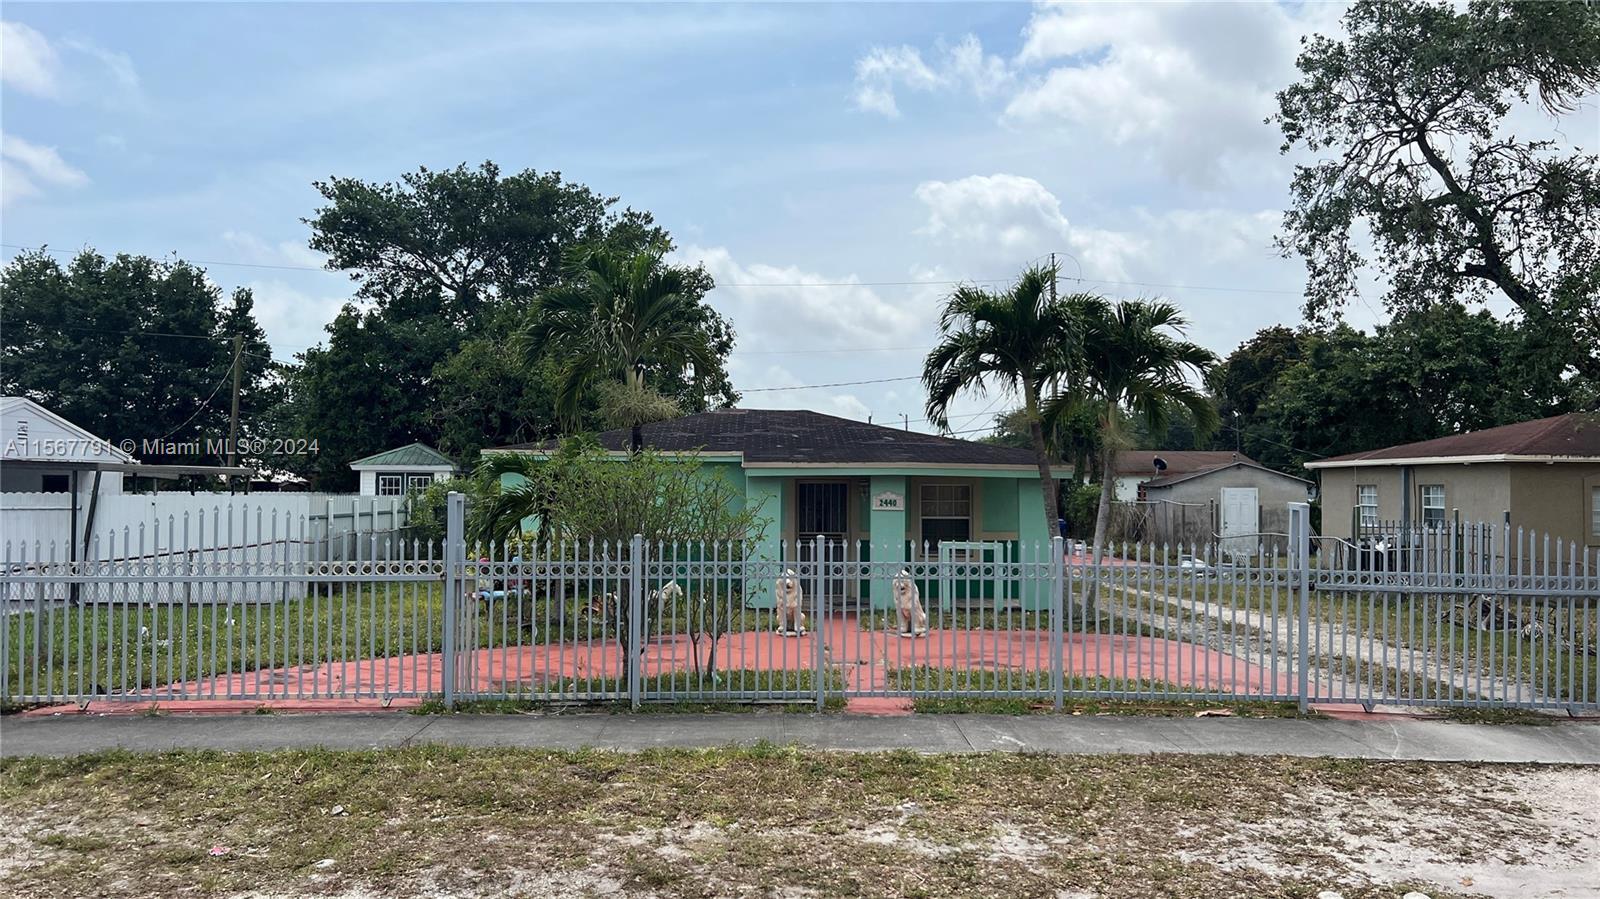 Photo of 2440 NW 154th St in Miami Gardens, FL